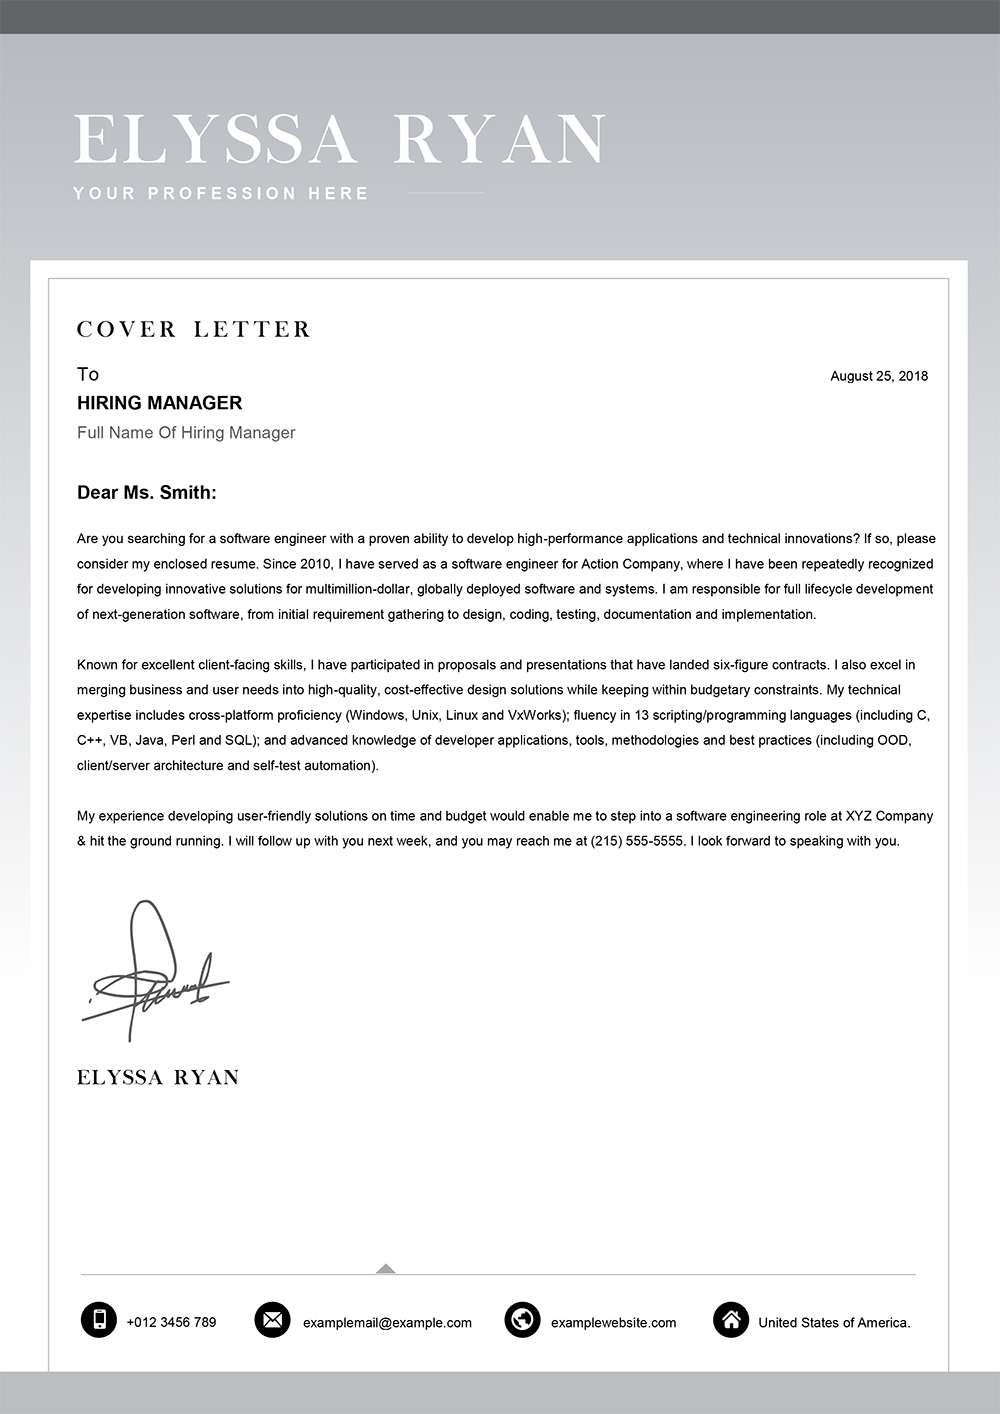 30-cover-letter-examples-applying-for-a-job-image-gover